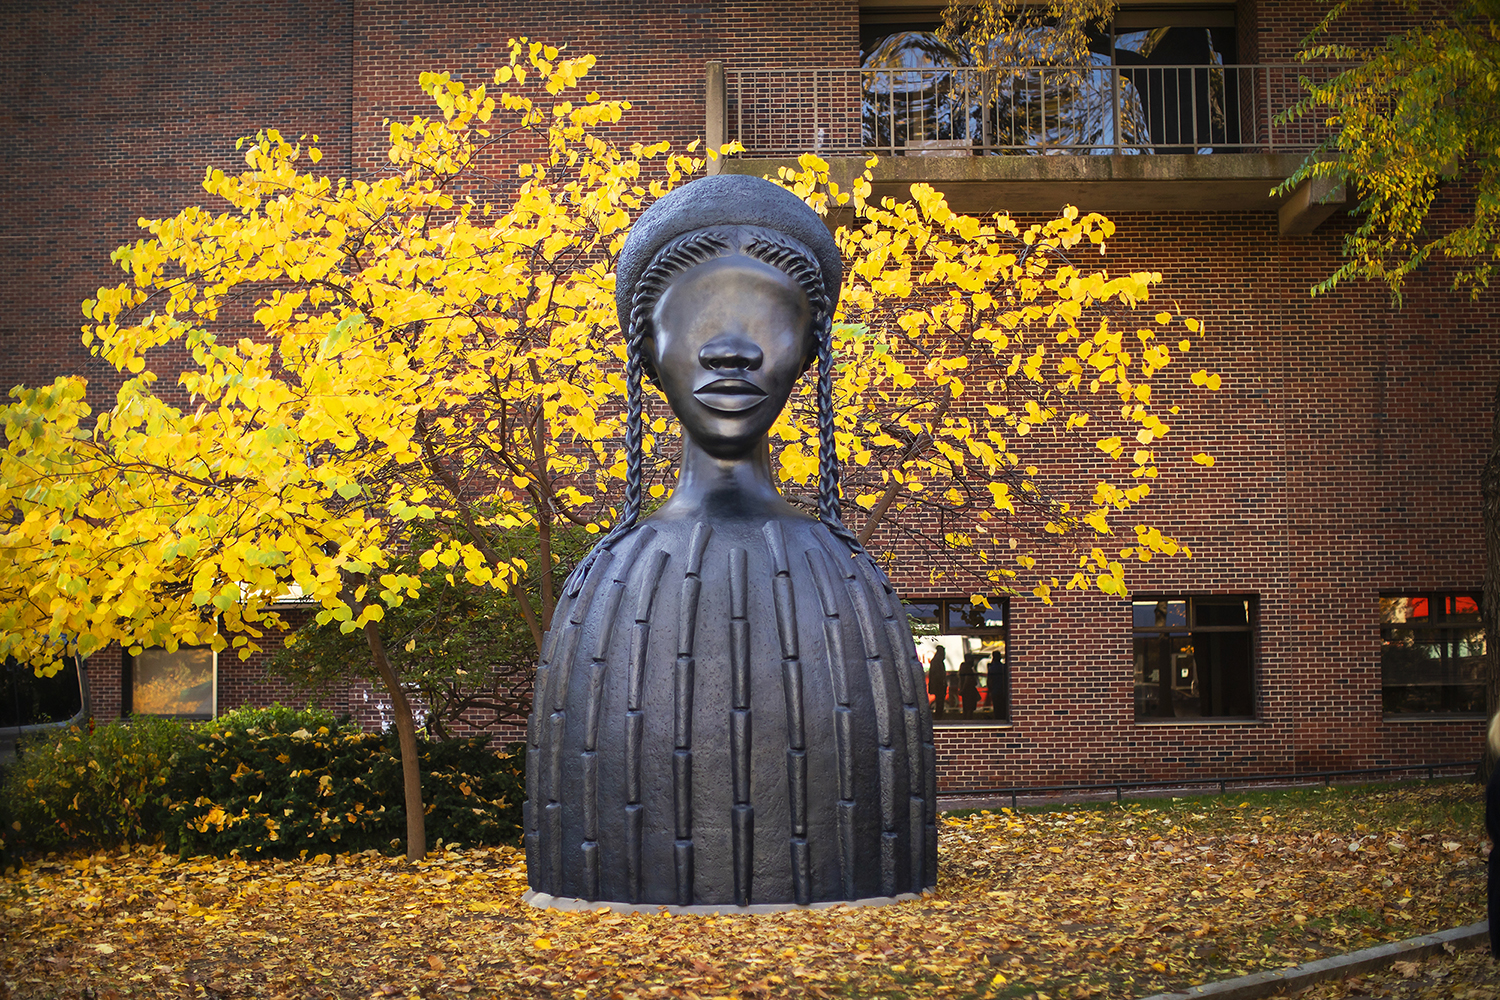 Brick House sculpture in front of yellow tree with yellow and orange leaves blanketing the ground